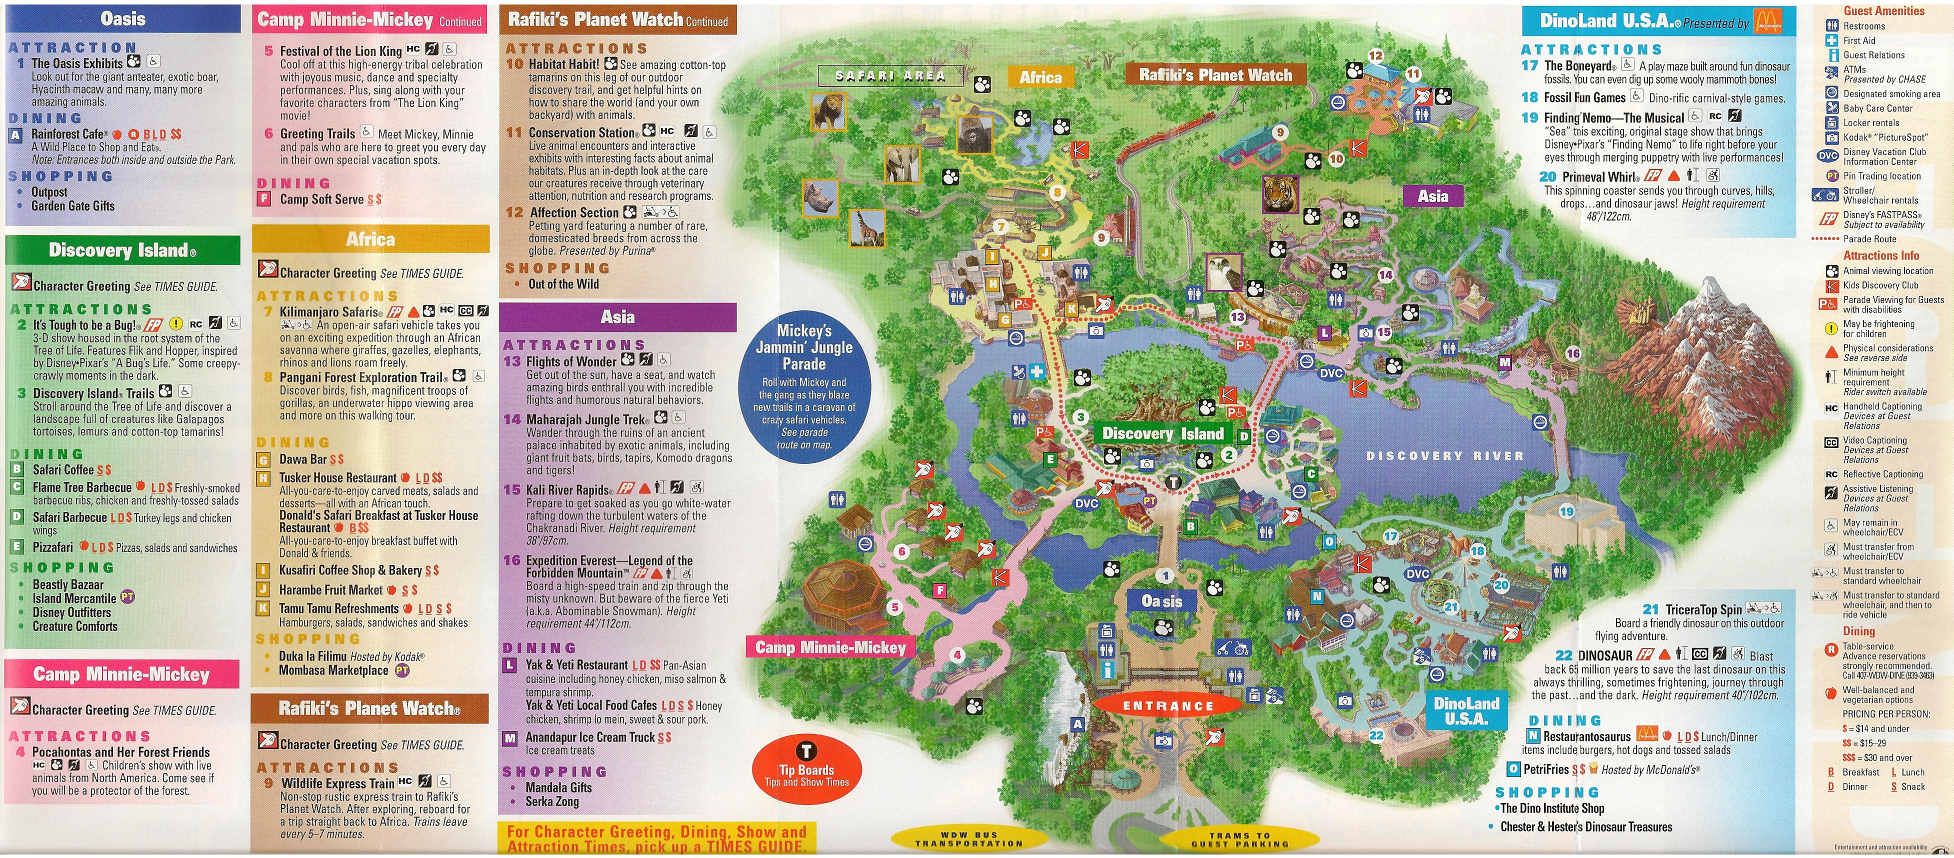 Discovery Cove Brochure Map